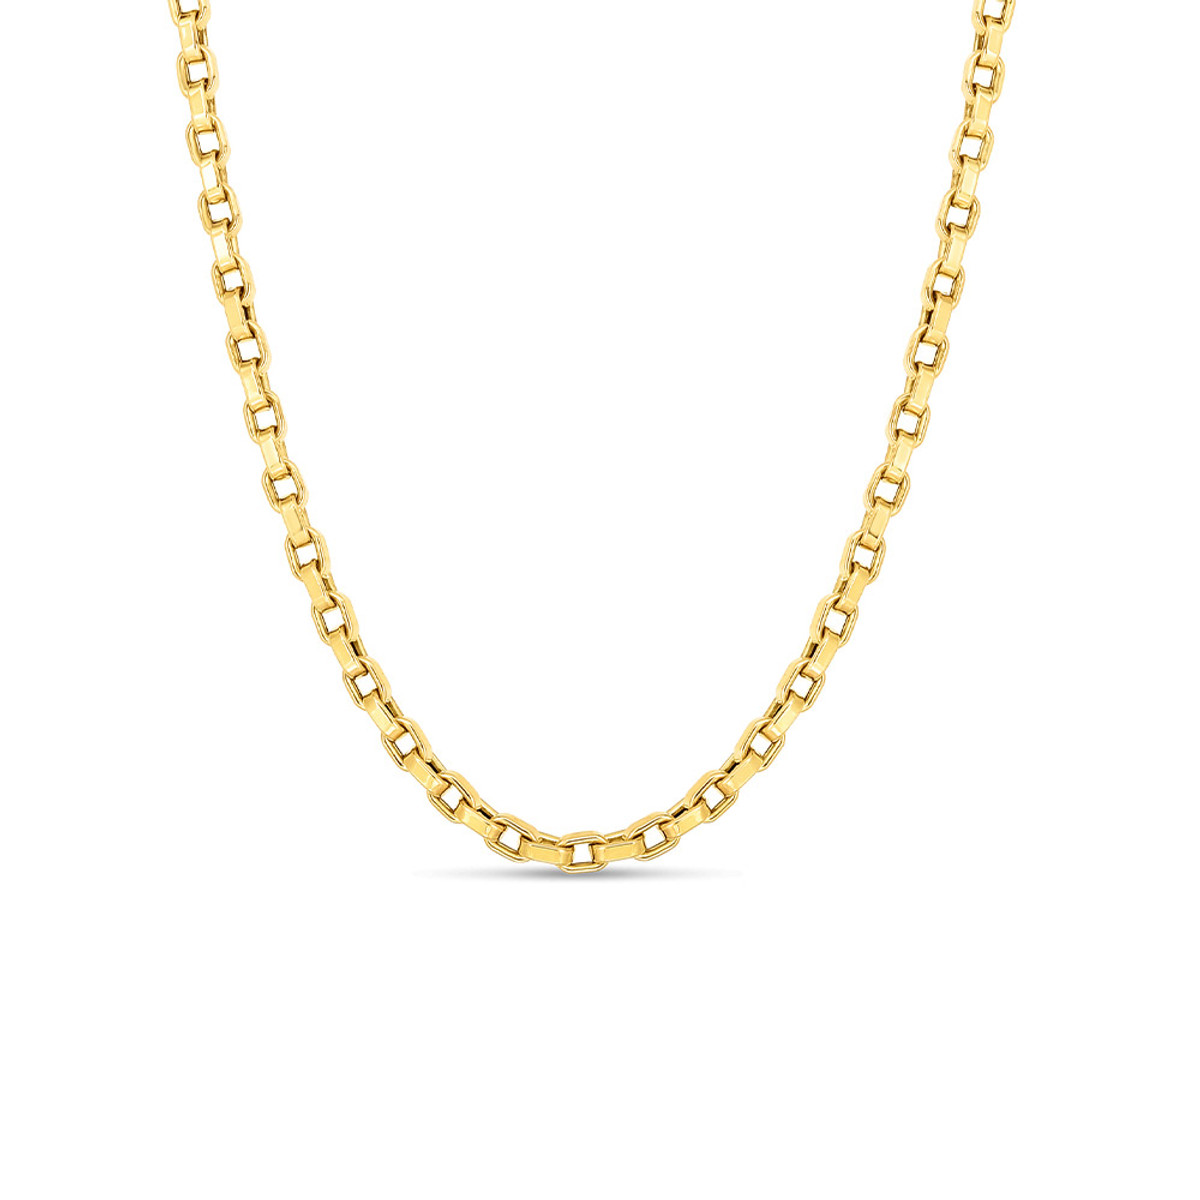 Roberto Coin 18K Yellow Gold Designer Gold Square Link Chain Necklace-51977